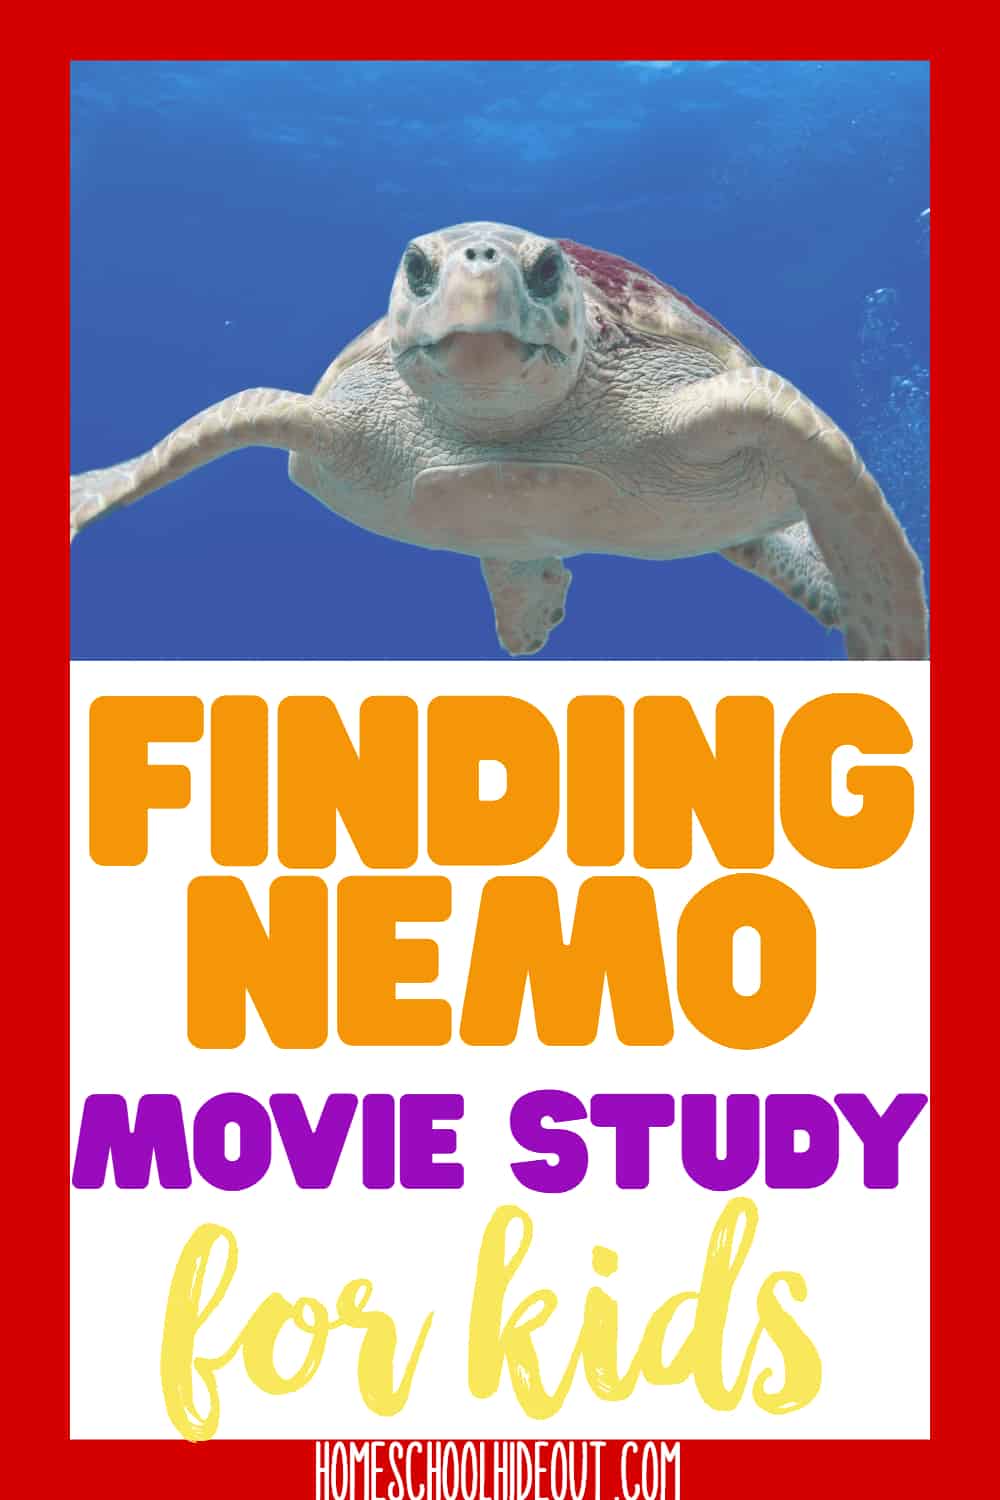 Make movie nights educational and engaging when you use one of these amazing movie studies for kids! #homeschoolers #learnthroughmovies #findingnemoMake movie nights educational and engaging when you use one of these amazing movie studies for kids! #homeschoolers #learnthroughmovies #findingnemo